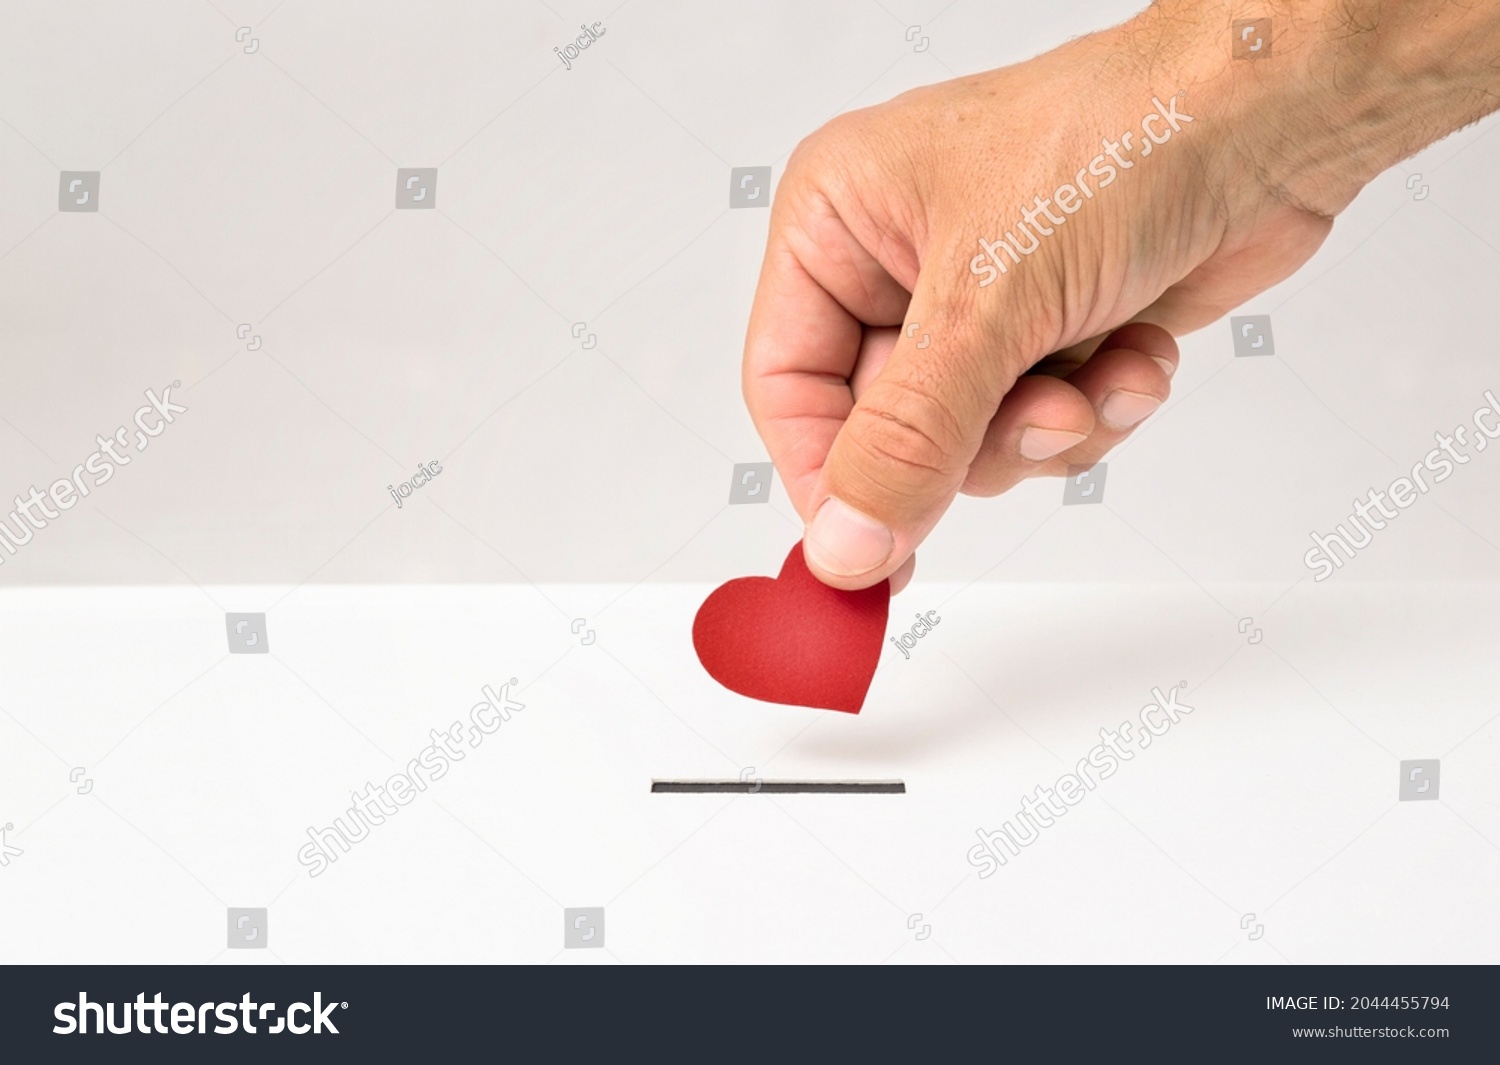 Red heart symbol is put by person's hand into slot of white donation box, Concept of donorship, life saving or charity #2044455794